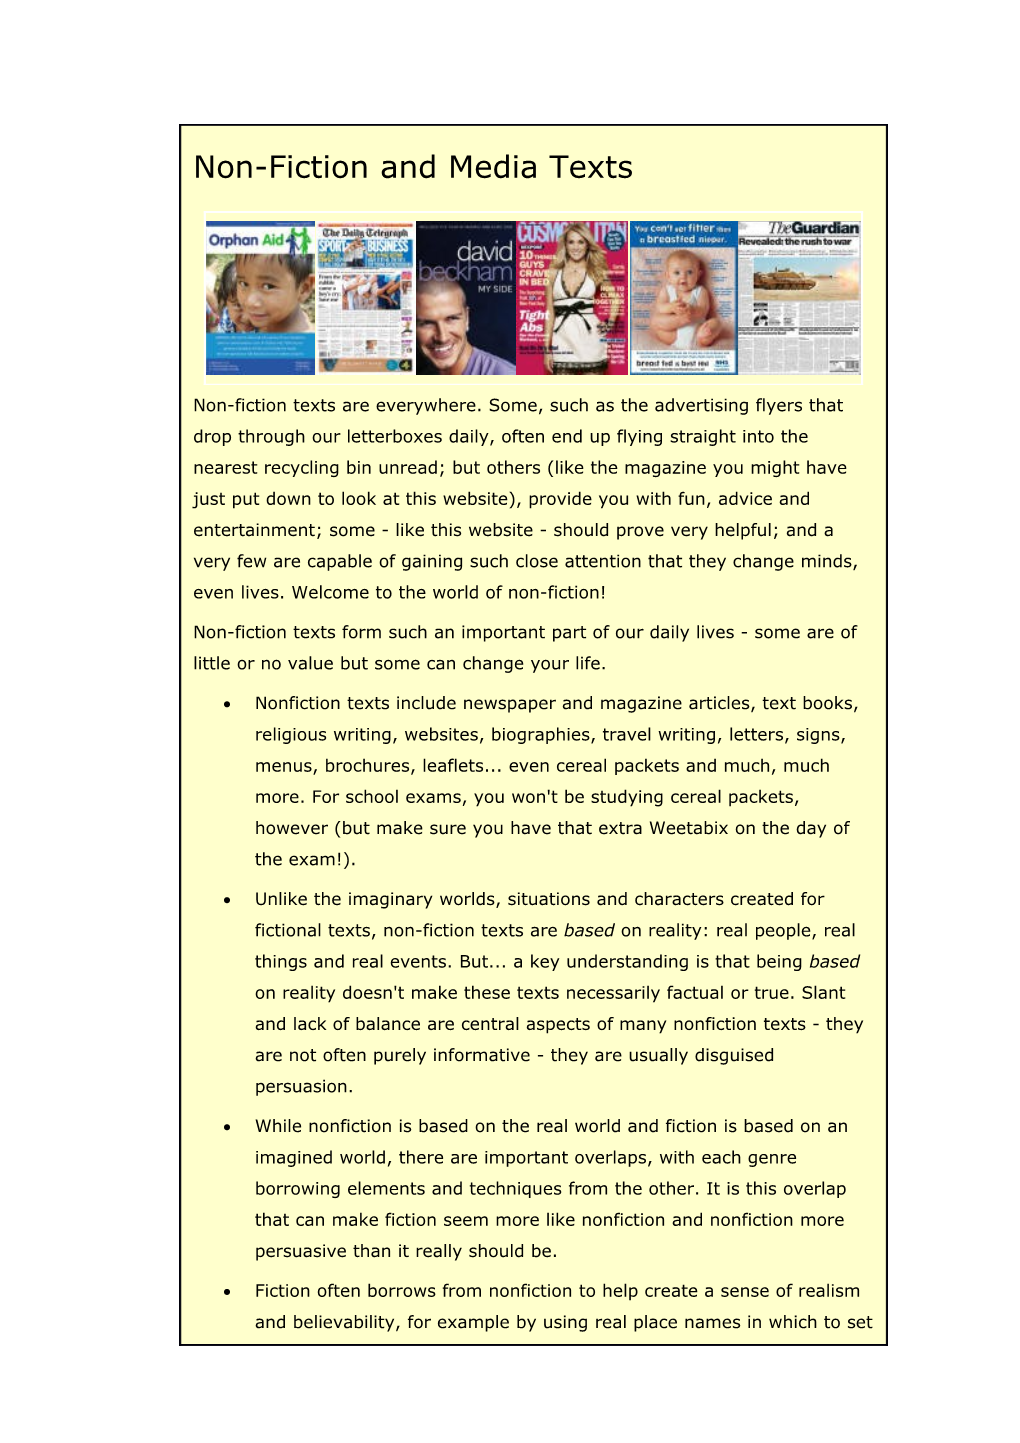 Nonfiction Texts Include Newspaper and Magazine Articles, Text Books, Religious Writing